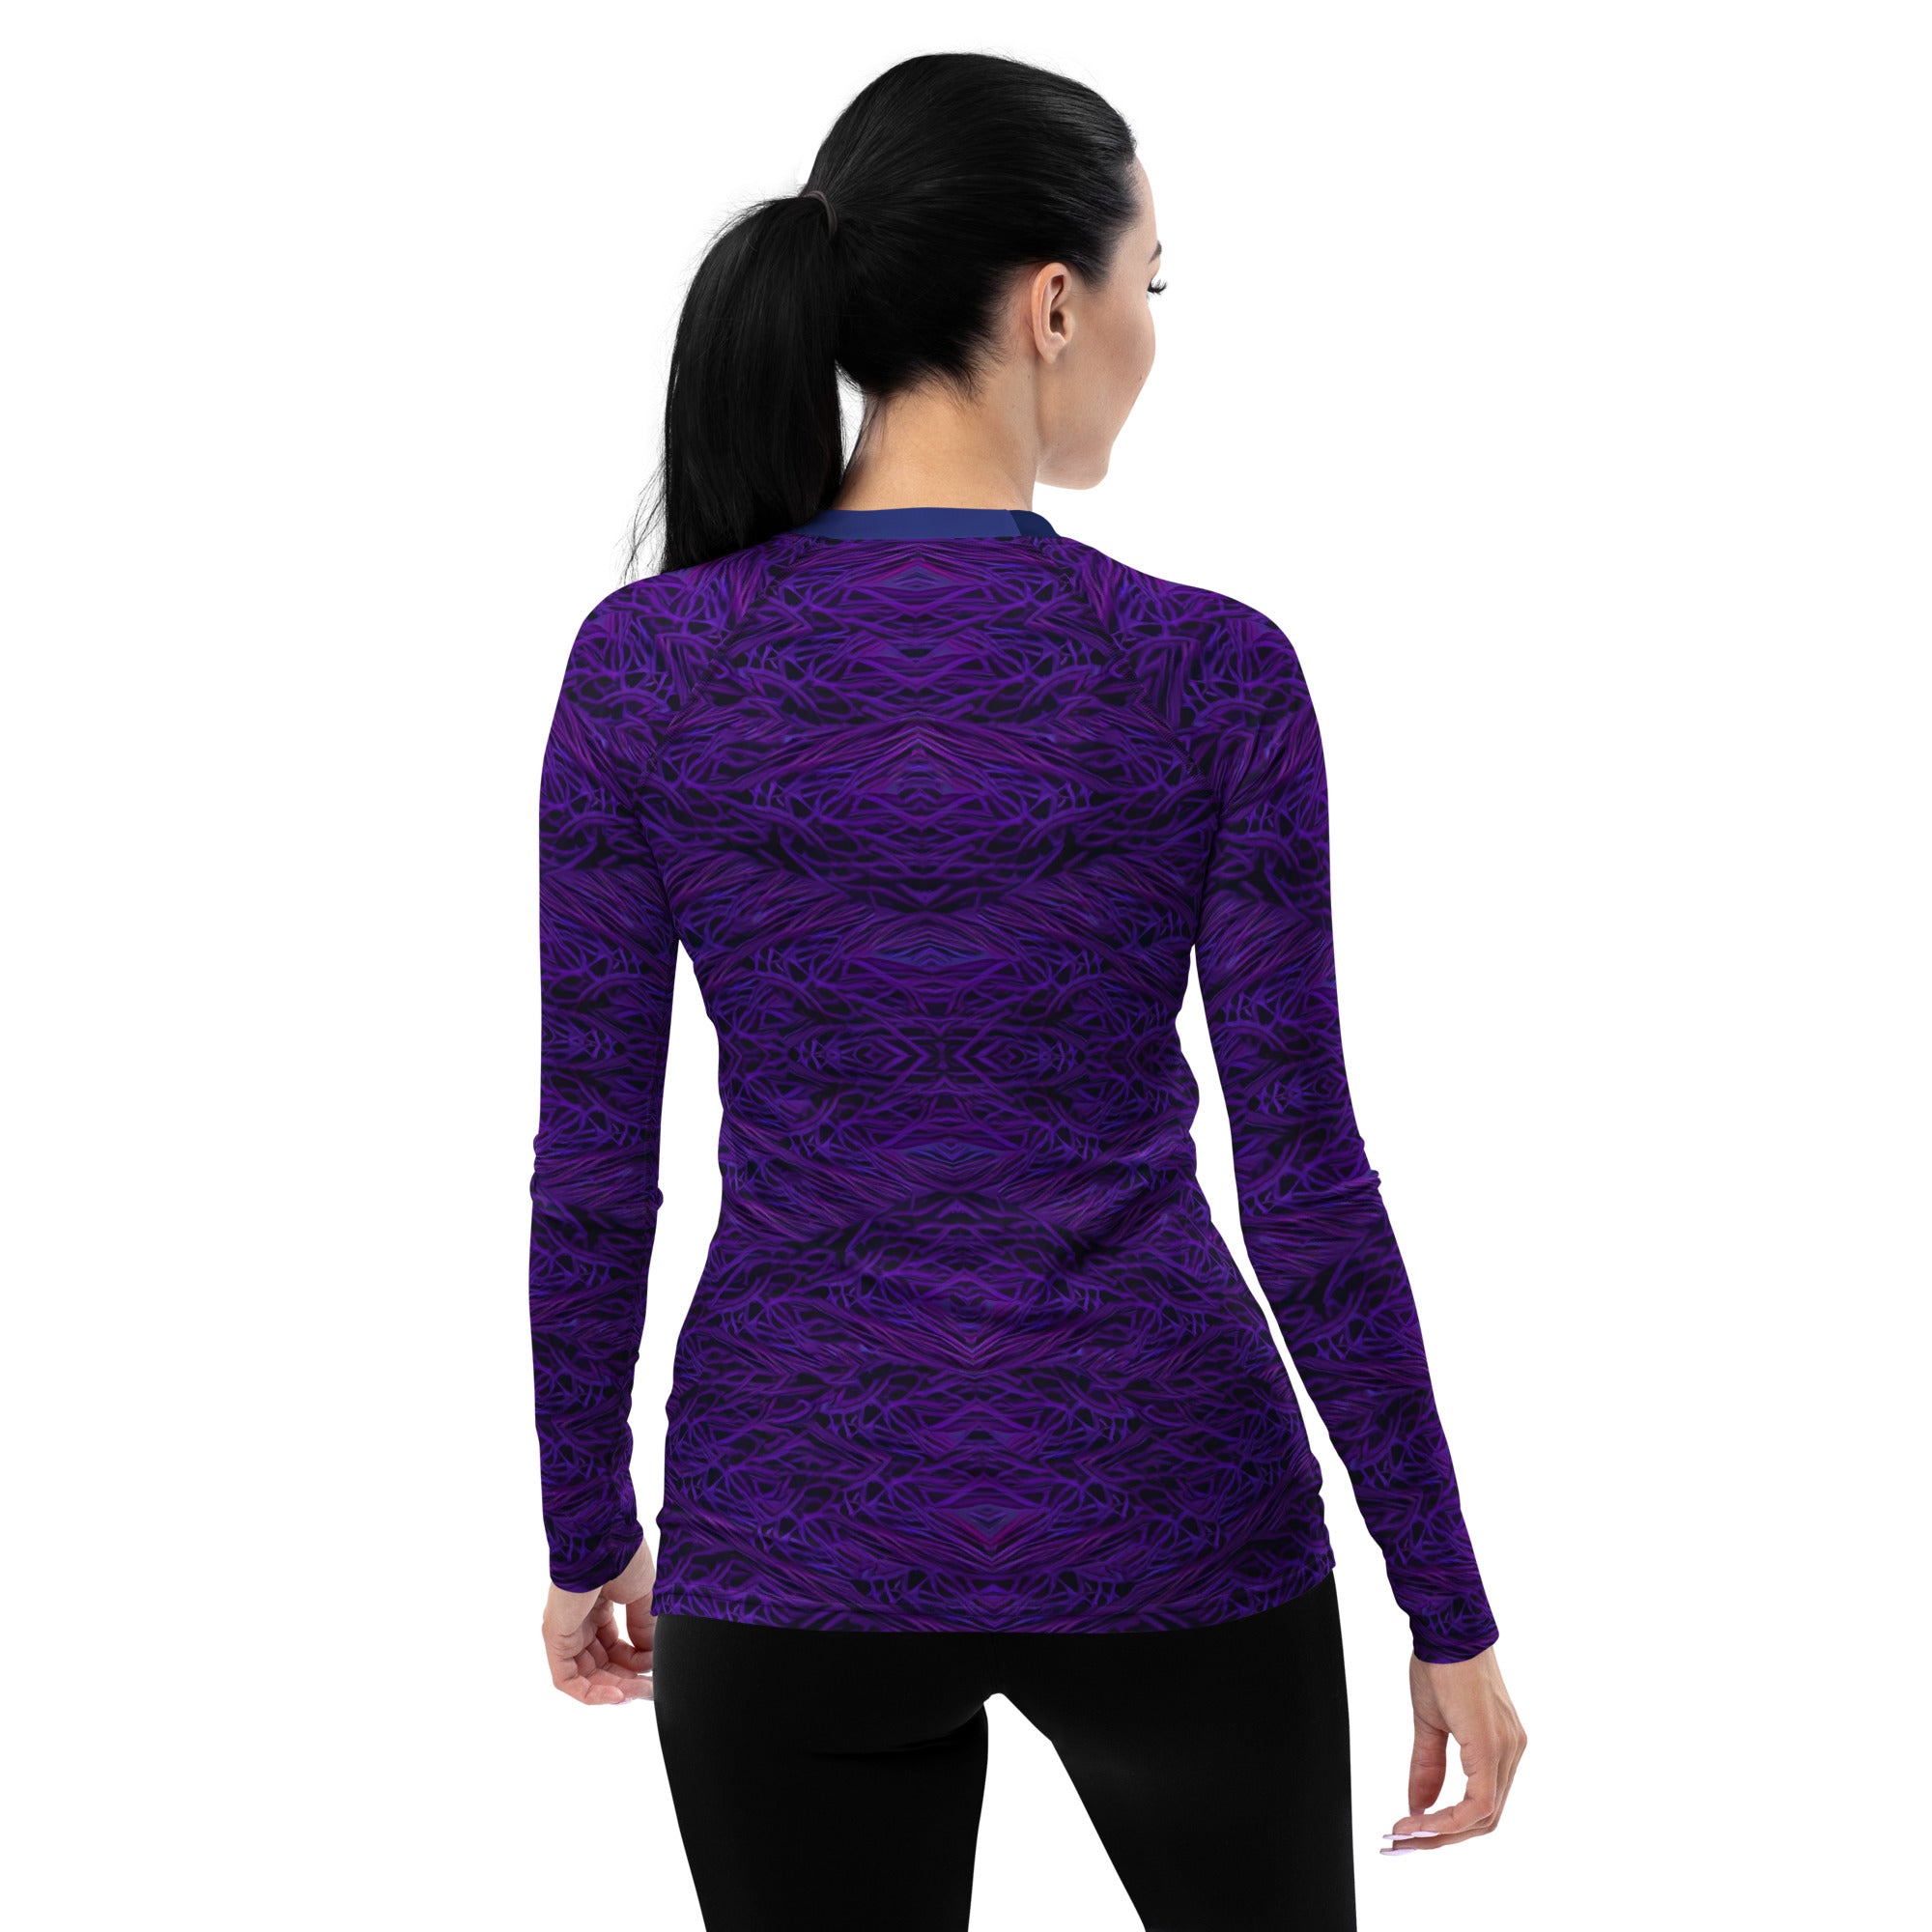 Stylish rash guard for women featuring forest path print.